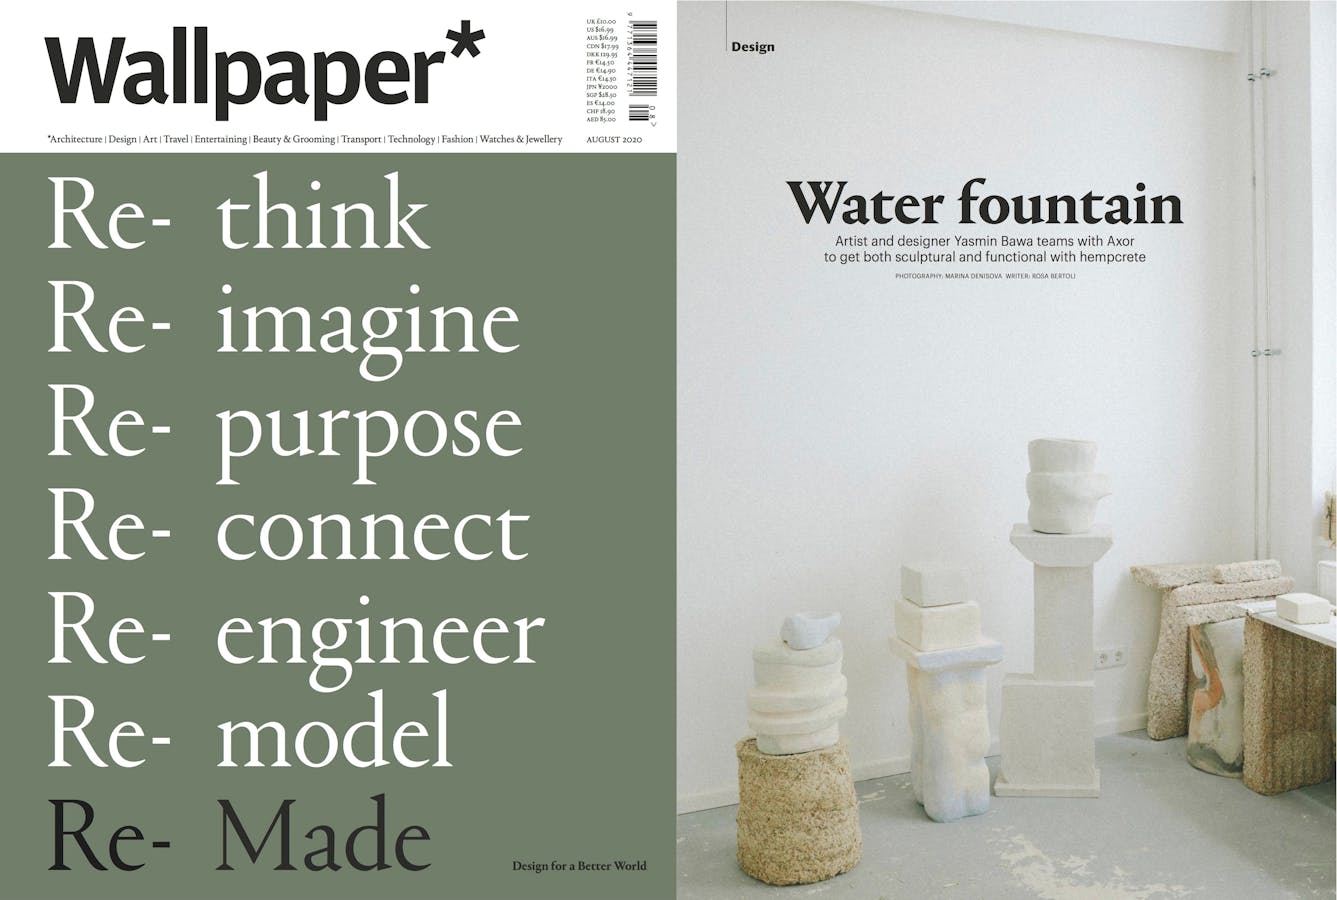 Wallpaper Magazine – The re-made issue, 2020